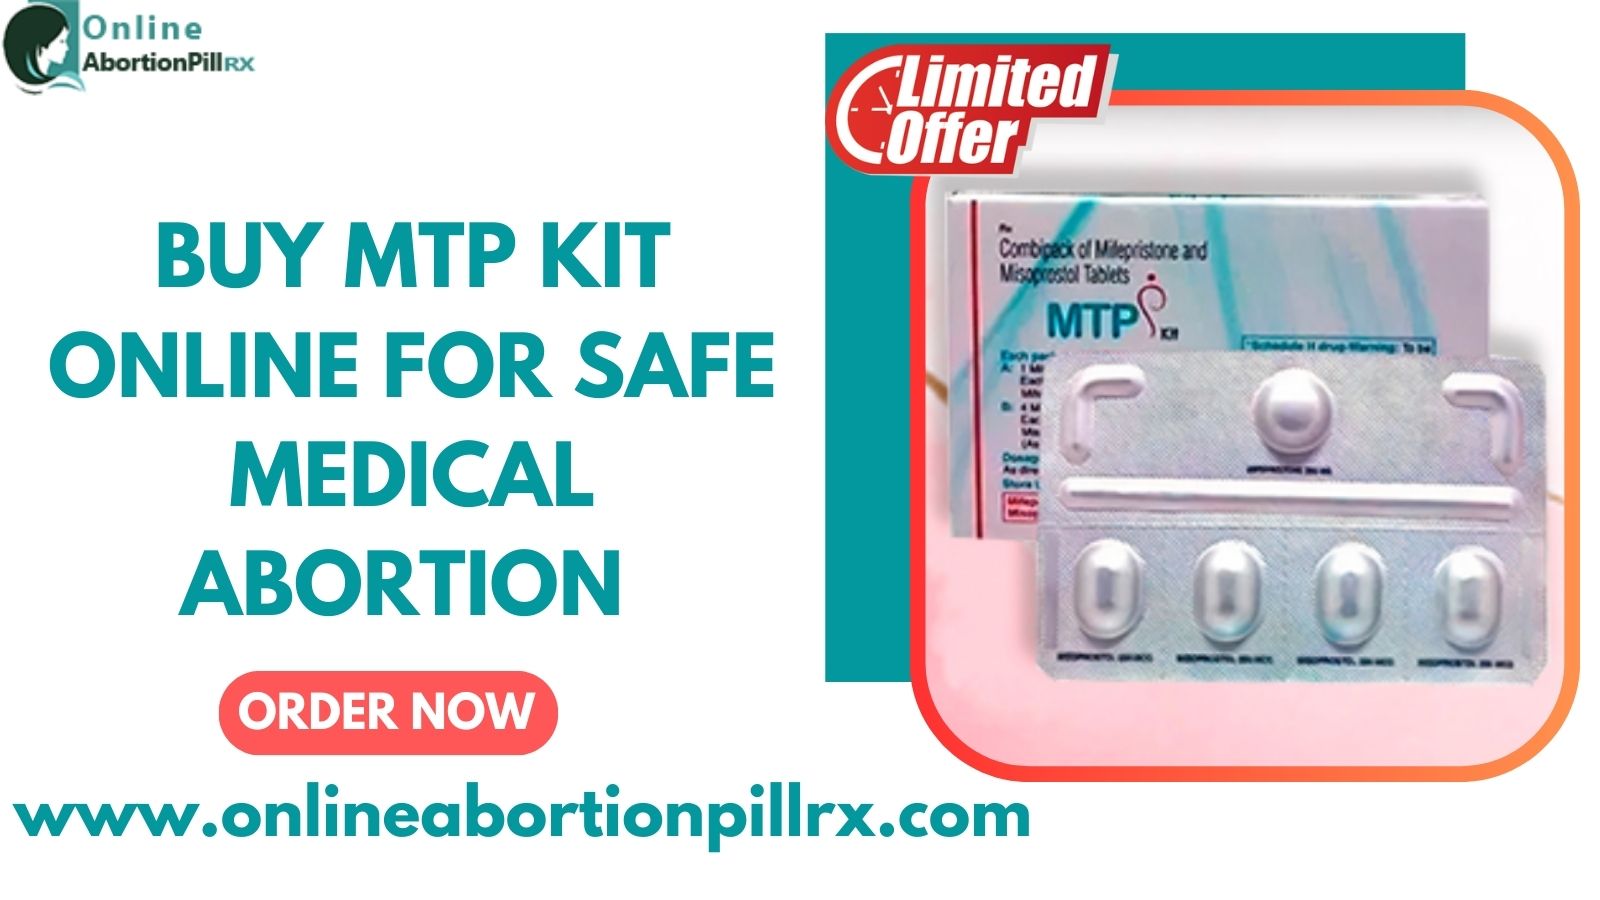  Buy Mtp kit online for safe medical abortion - Texas - Dallas ID1513539